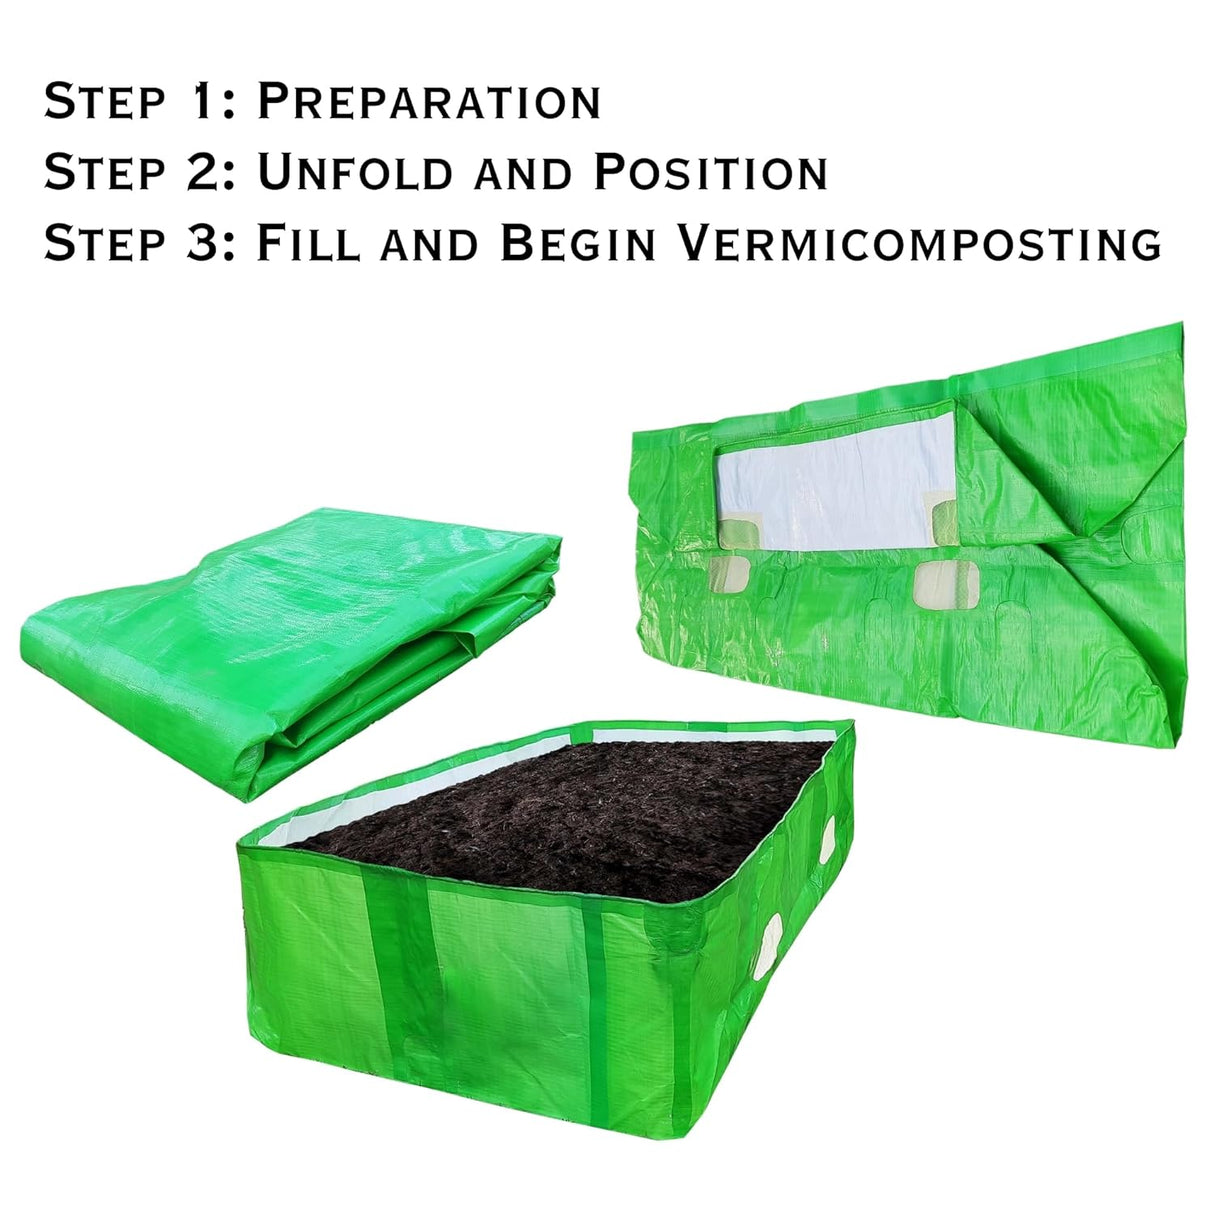 Singhal HDPE UV Stabilized Vermi Compost Bed 360 GSM, 8x4x2 Ft, 100% Virgin Quality Material, Green and White, Vermibed Agro Vermicompost Bed (Vermi Bed), Agro Vermi Compost Making Bed